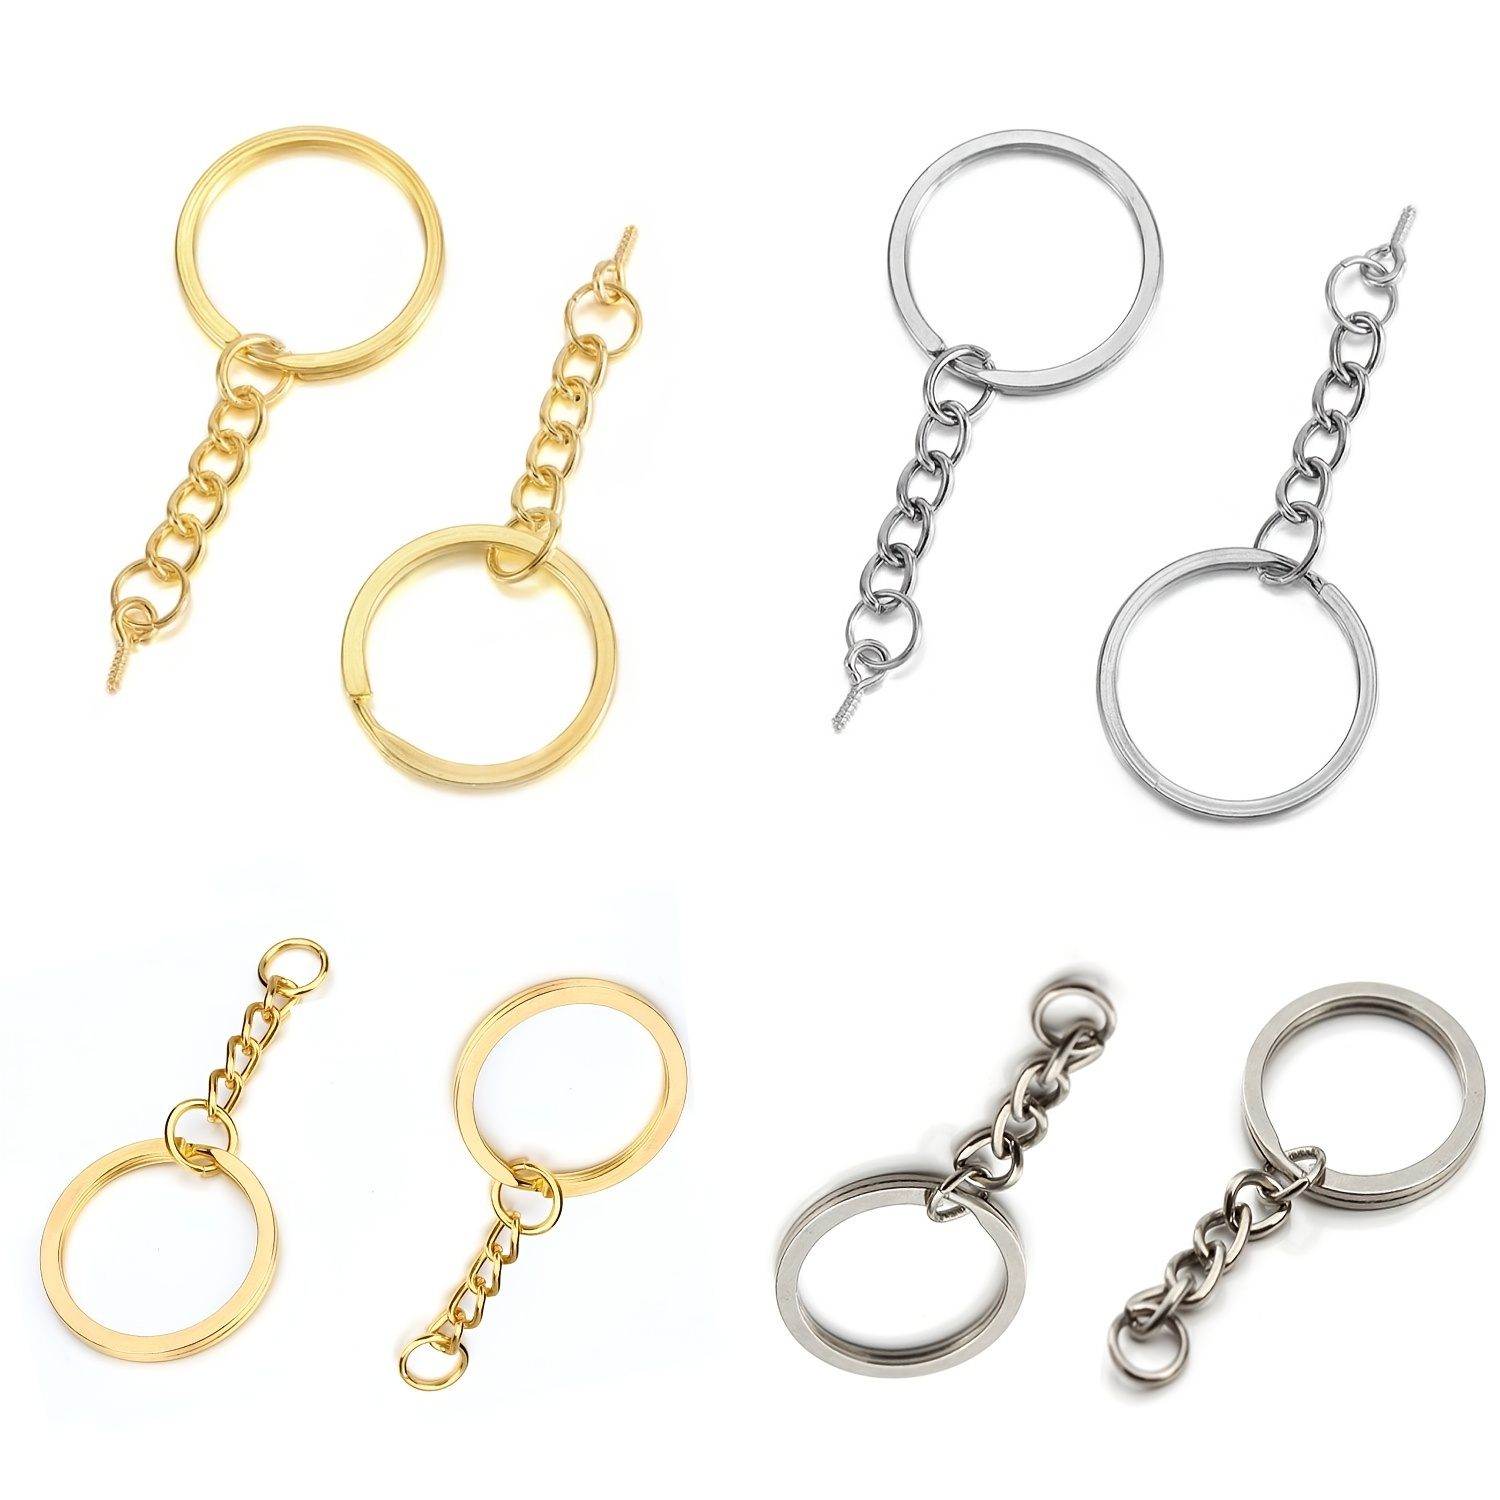 10 pcs/lot Key Ring Key Chain 60mm Long Round Split Keychain with Chain and  Jump Rings Jewelry Making Bulk Supplies 3 Sizes (Kc Gold, 25mm(0.98inch)) 